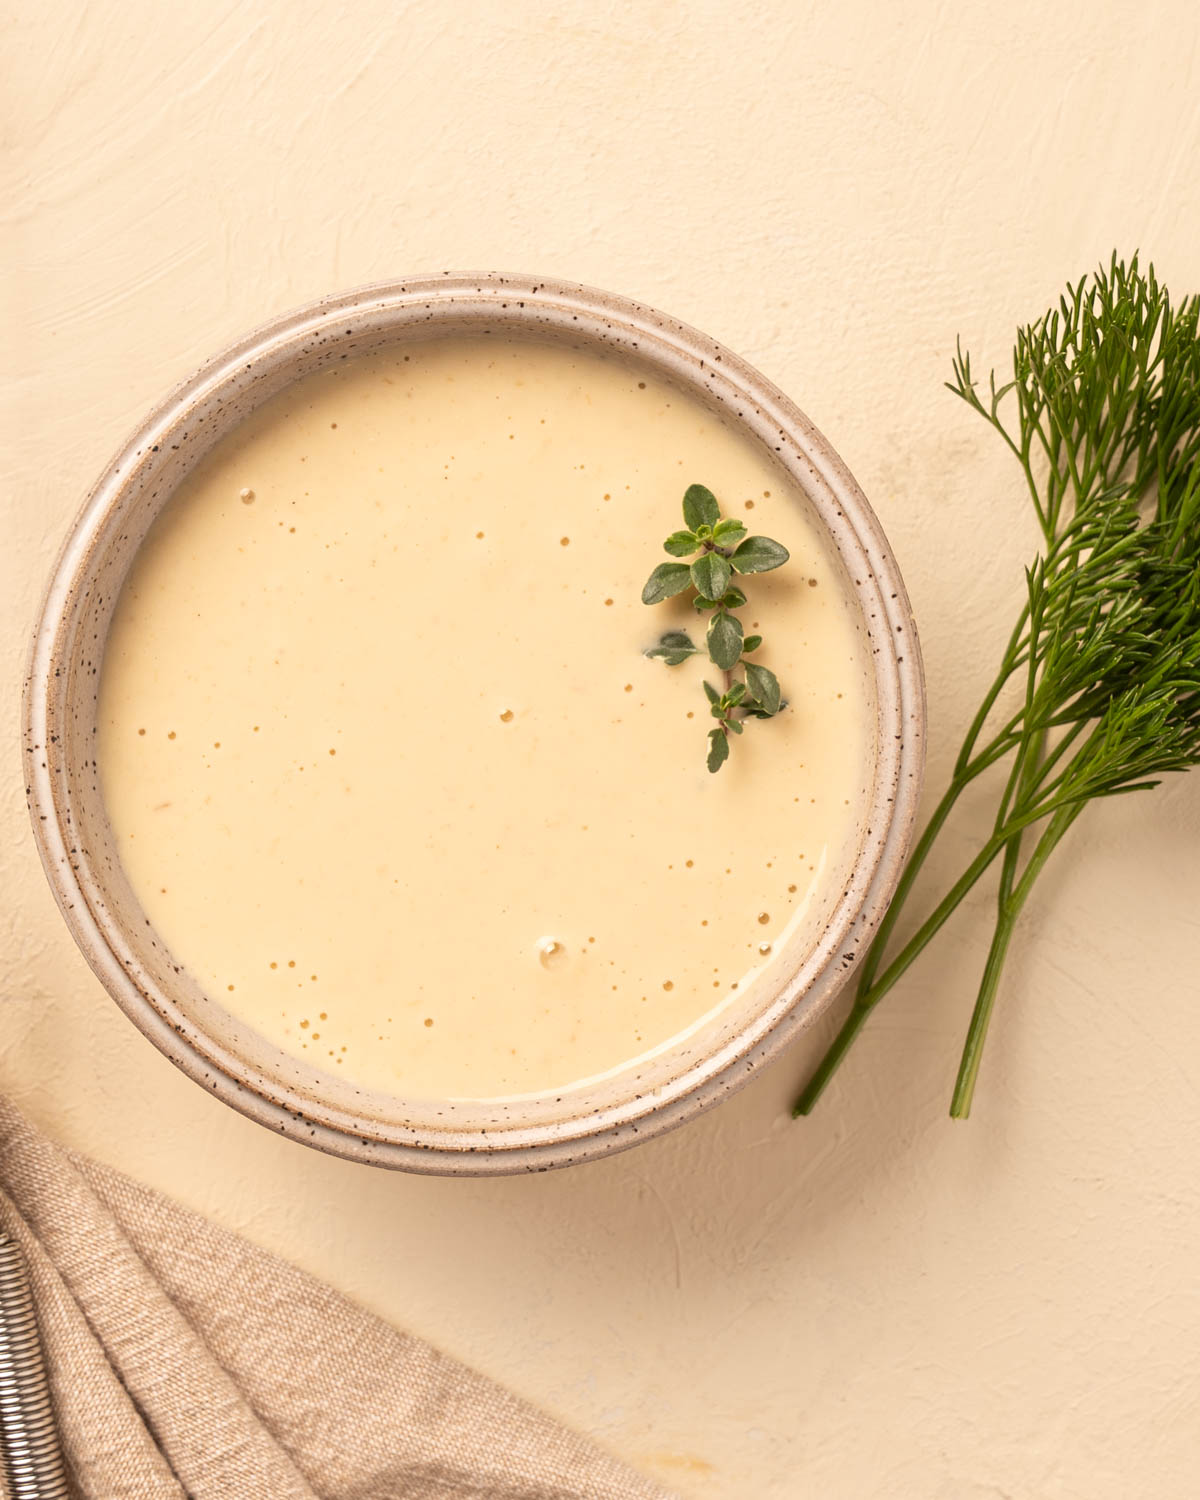 A stoneware bowl with a cream Horseradish Aioli along side some bright herbs.